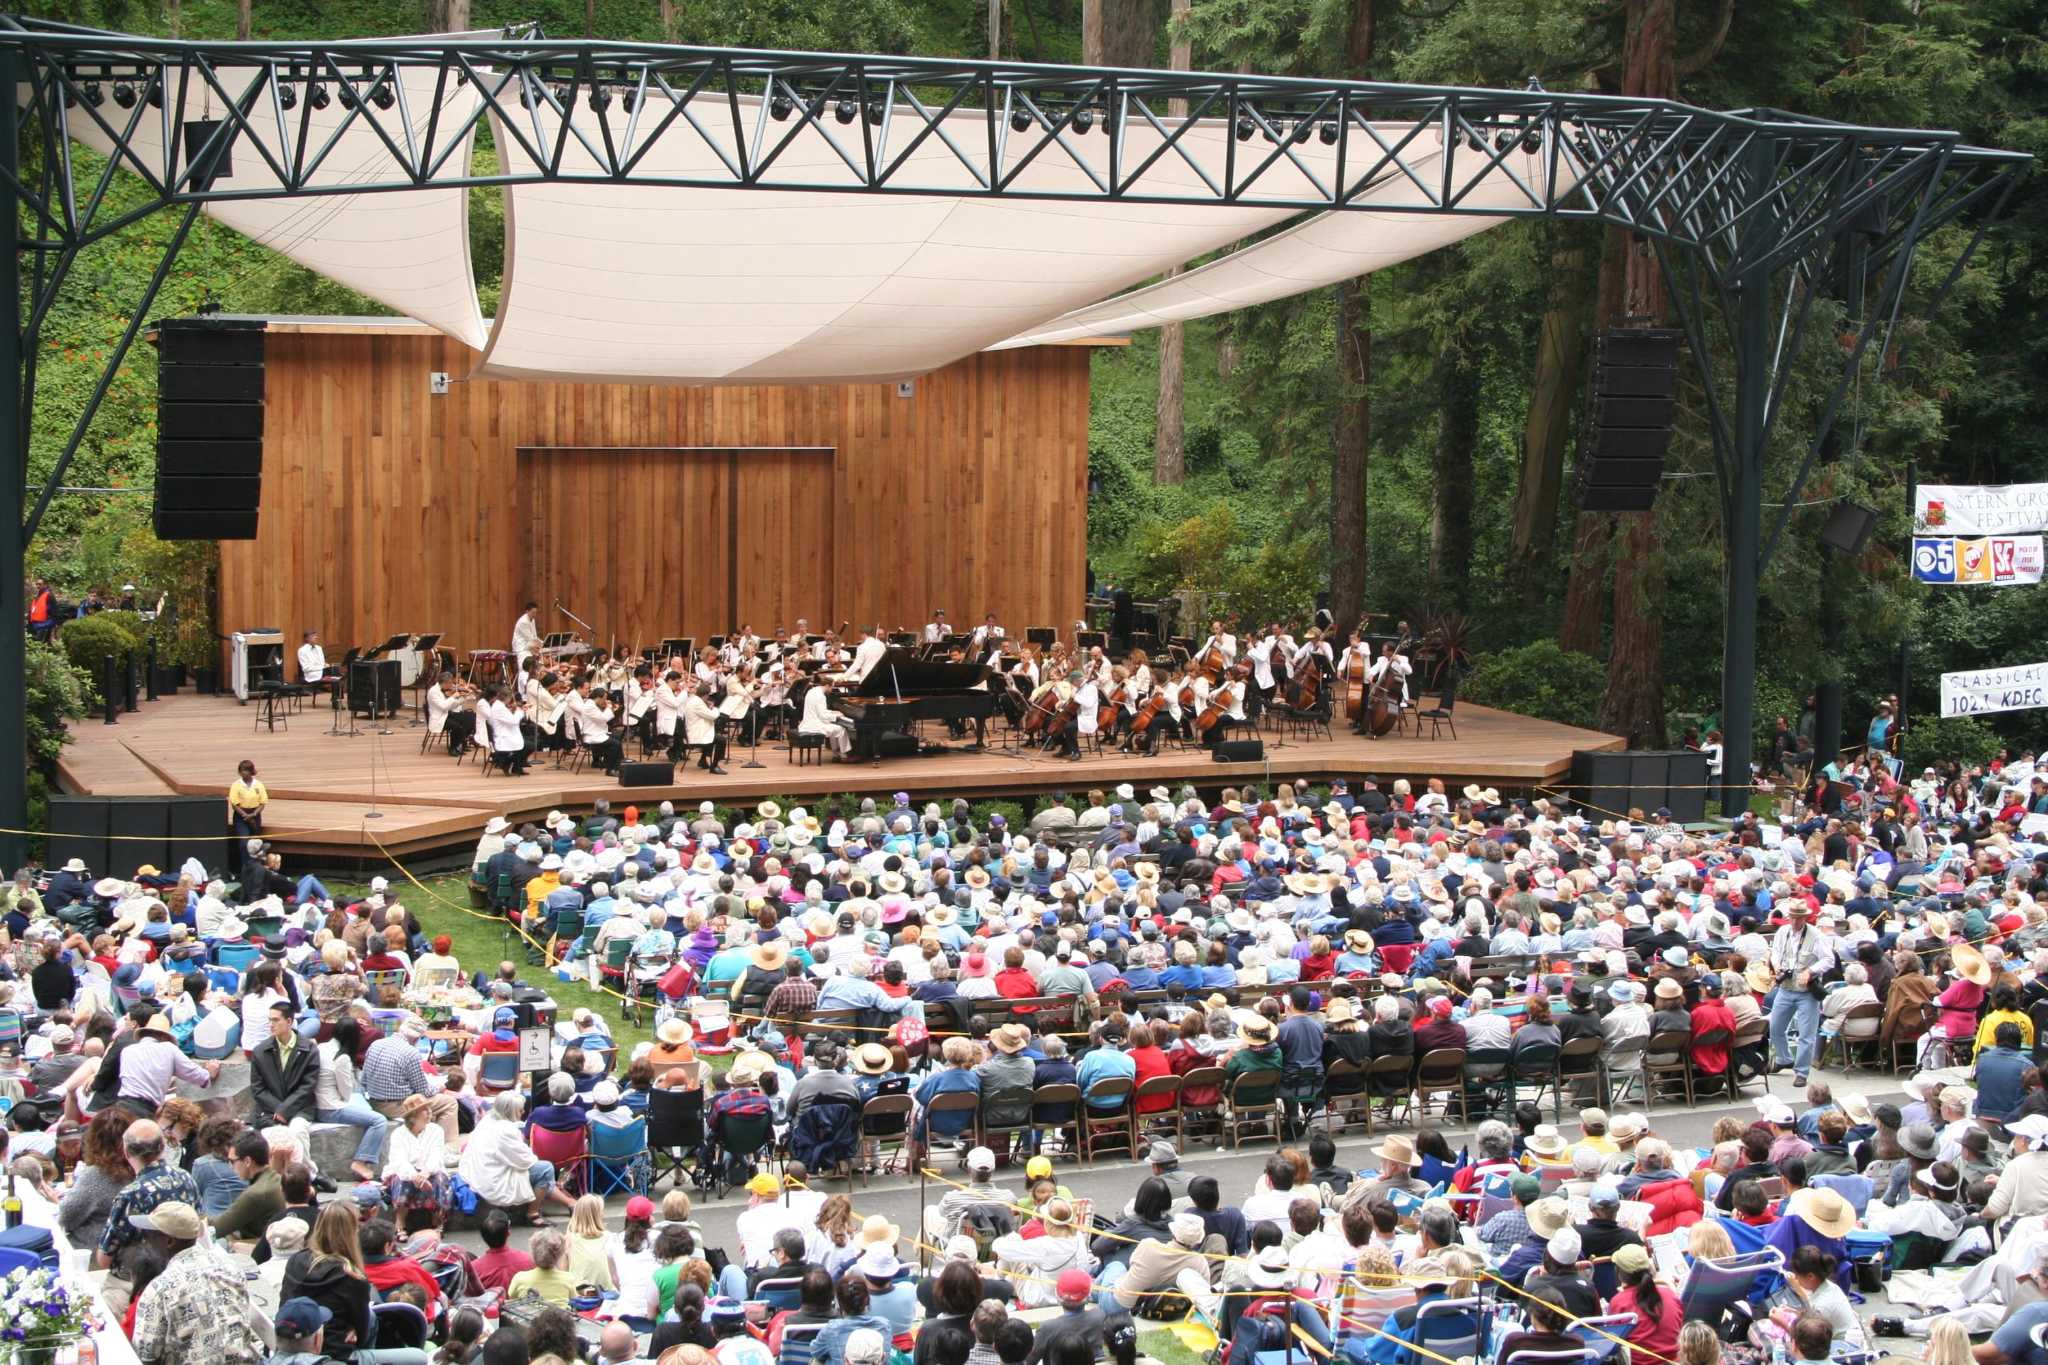 It's been an emotional roller coaster': Stern Grove concert series canceled